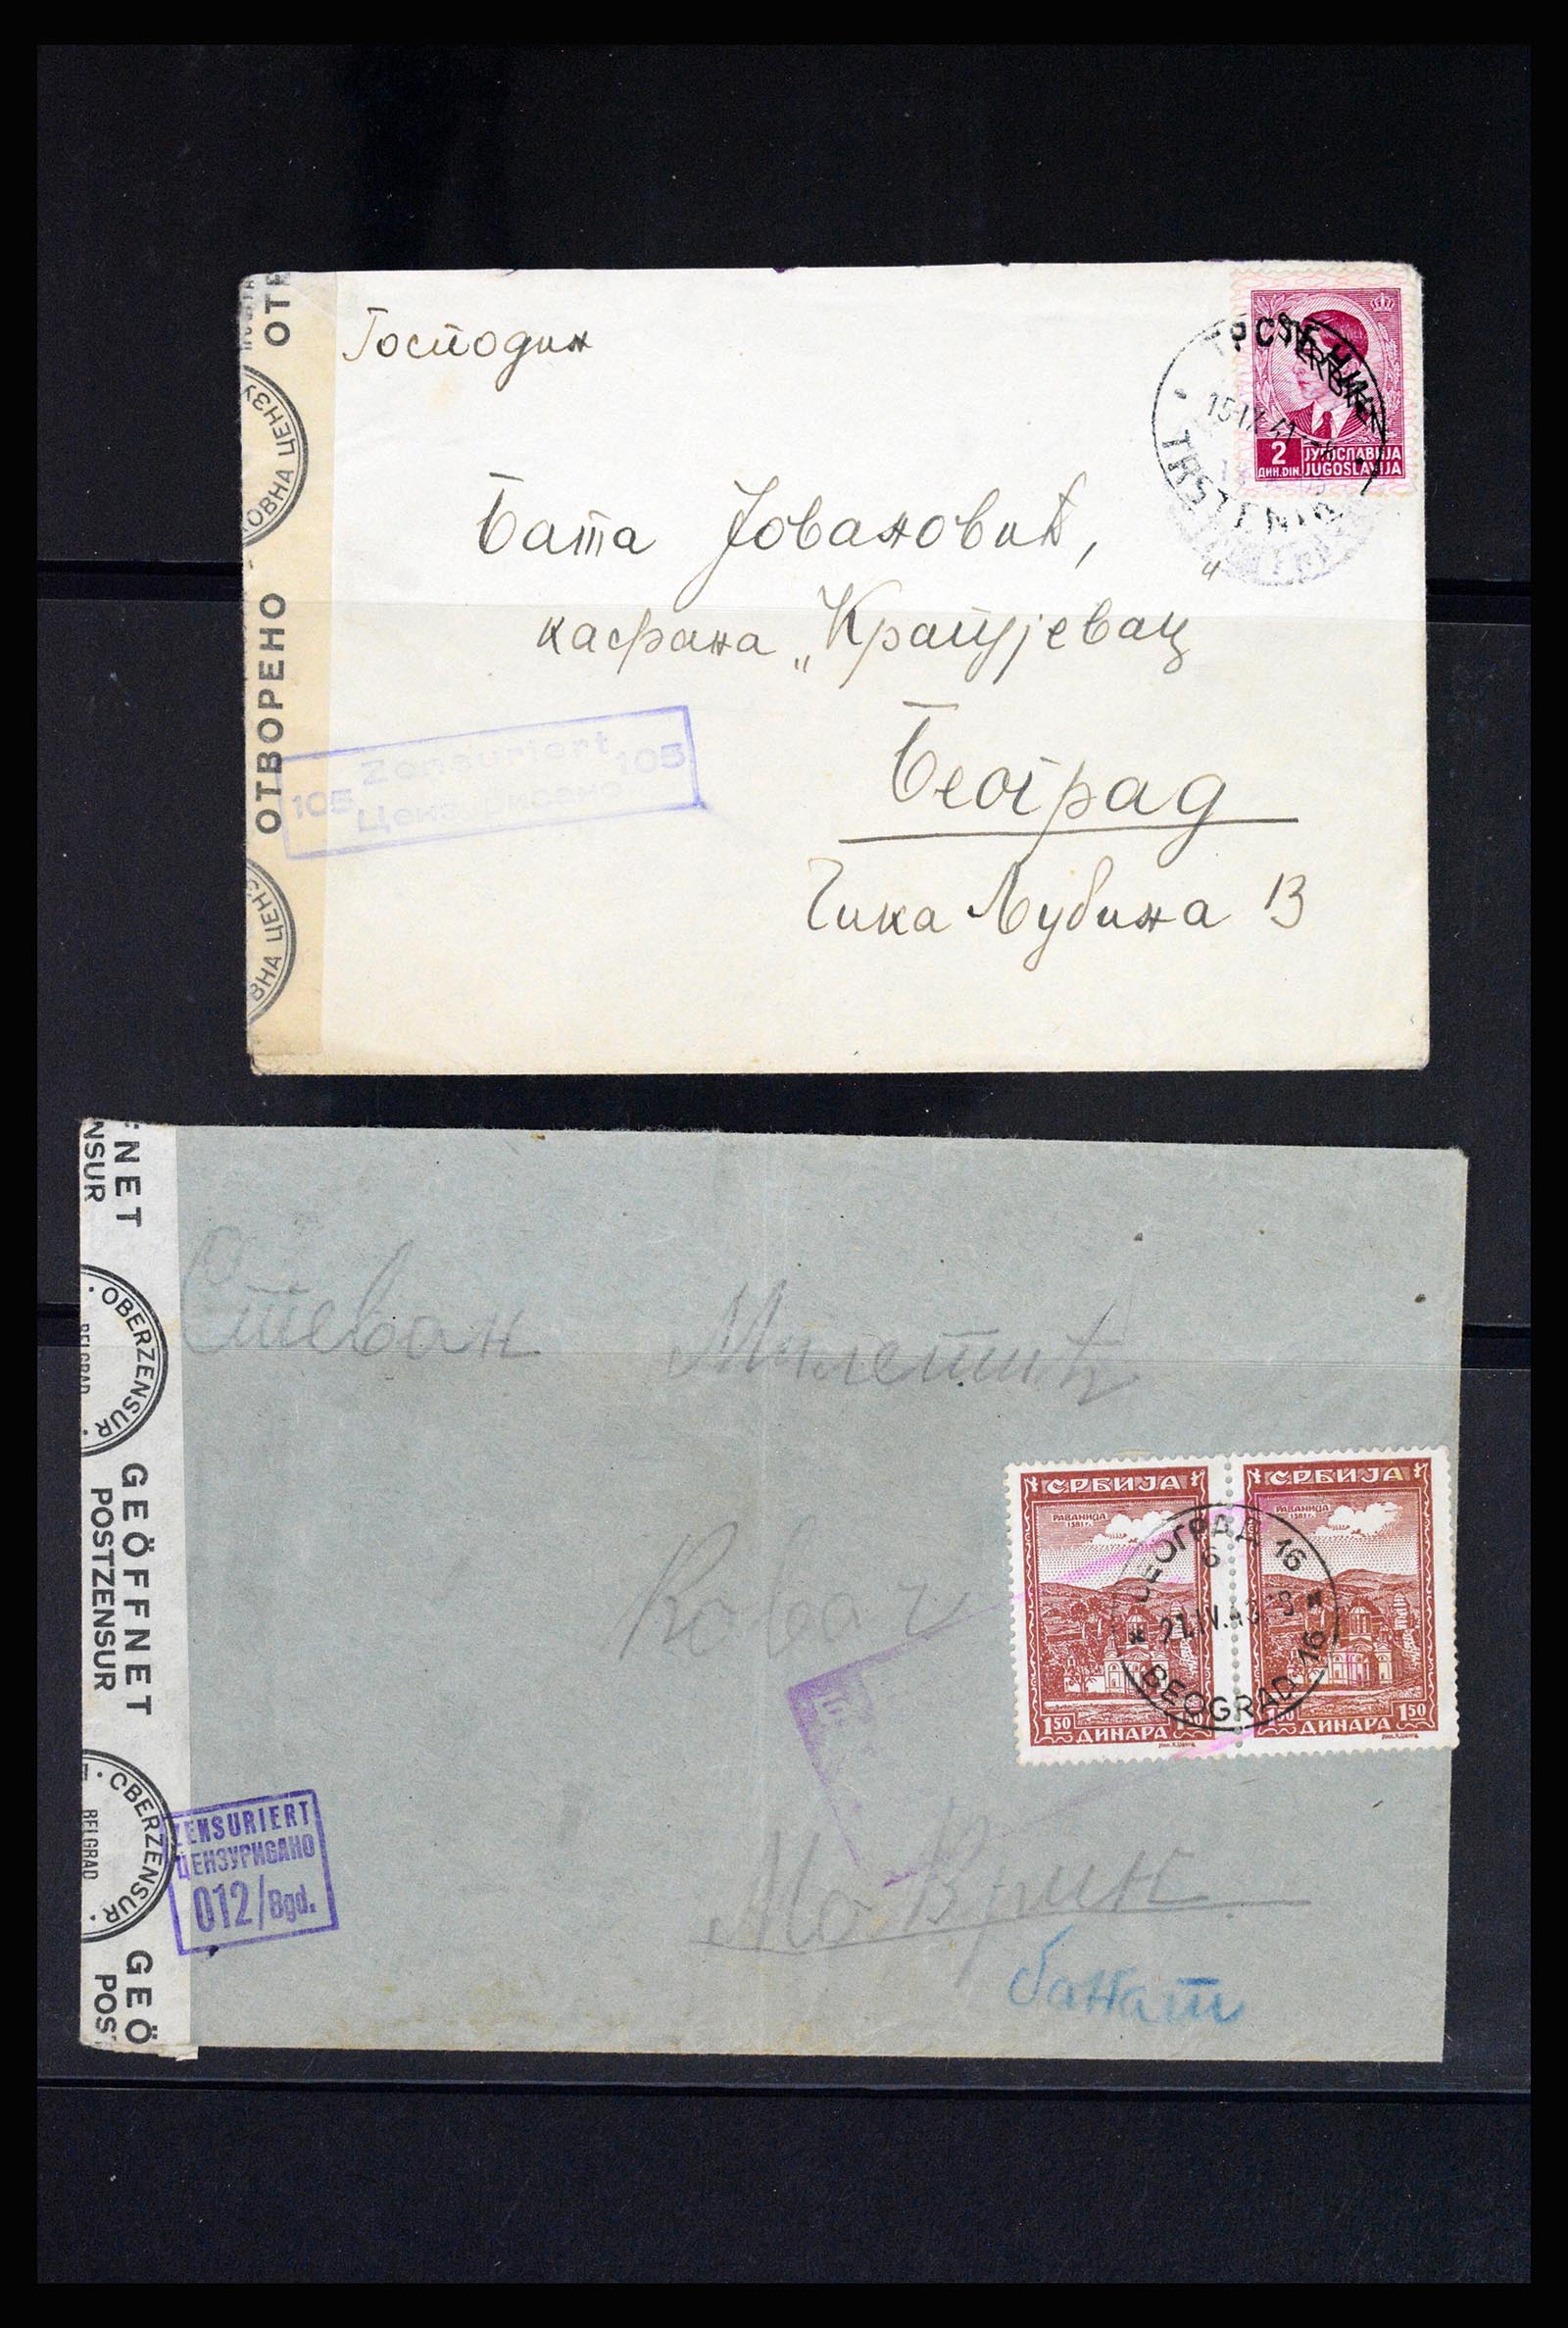 37066 127 - Stamp collection 37066 Serbia covers WW II.